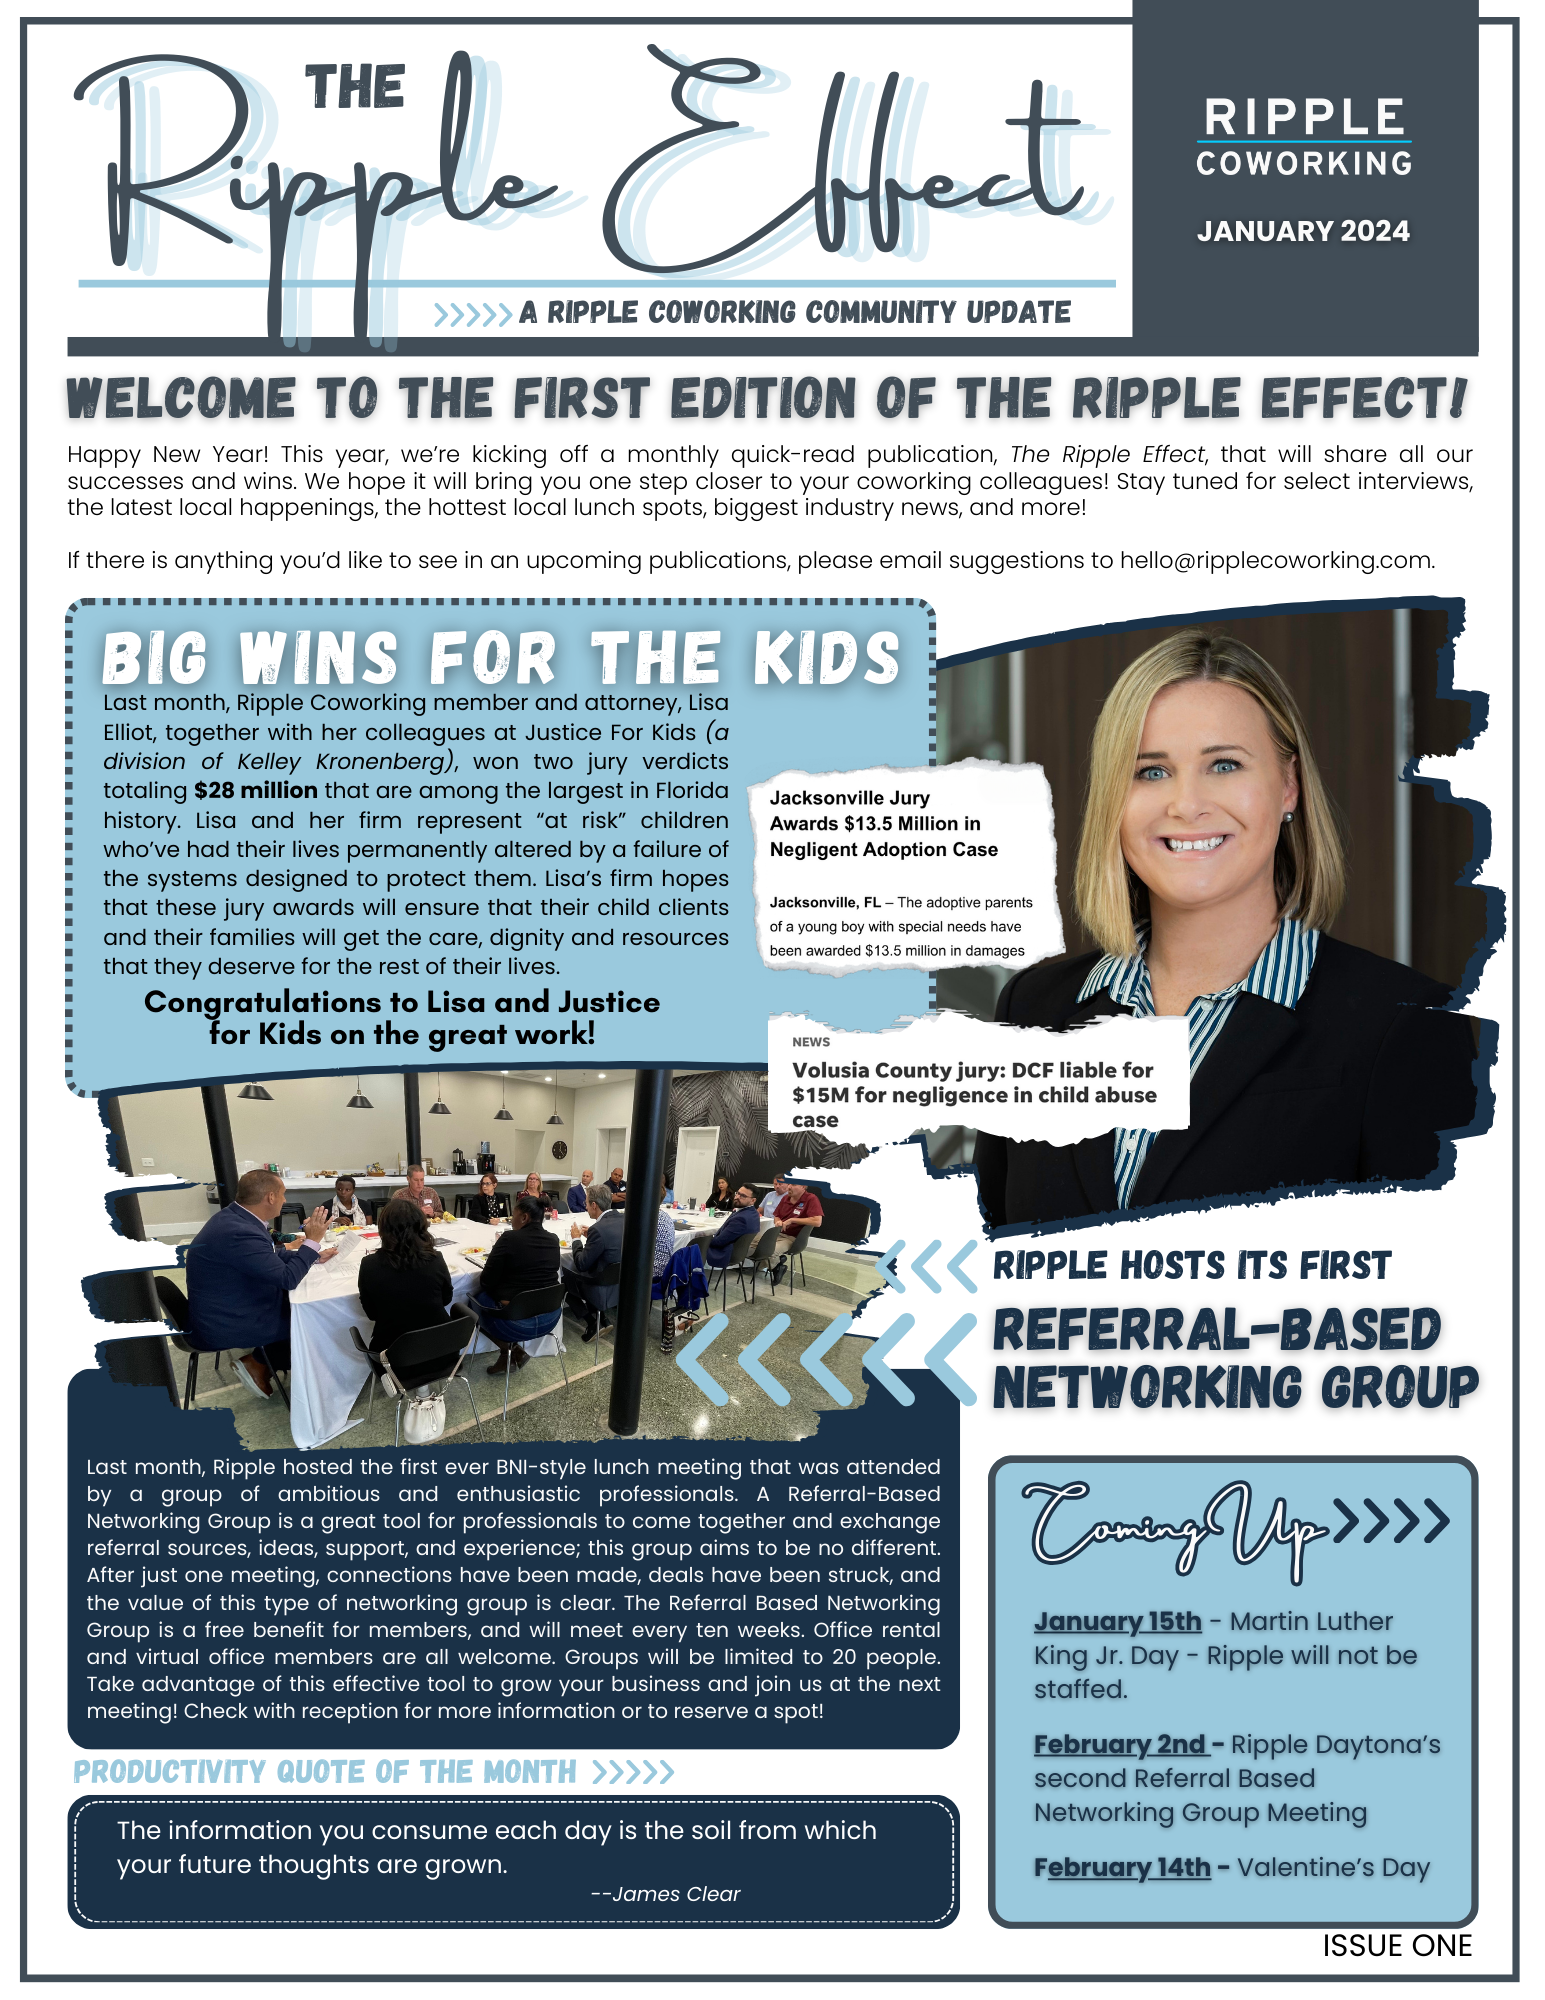 Ripple Coworking Monthly Newsletter - January 2024